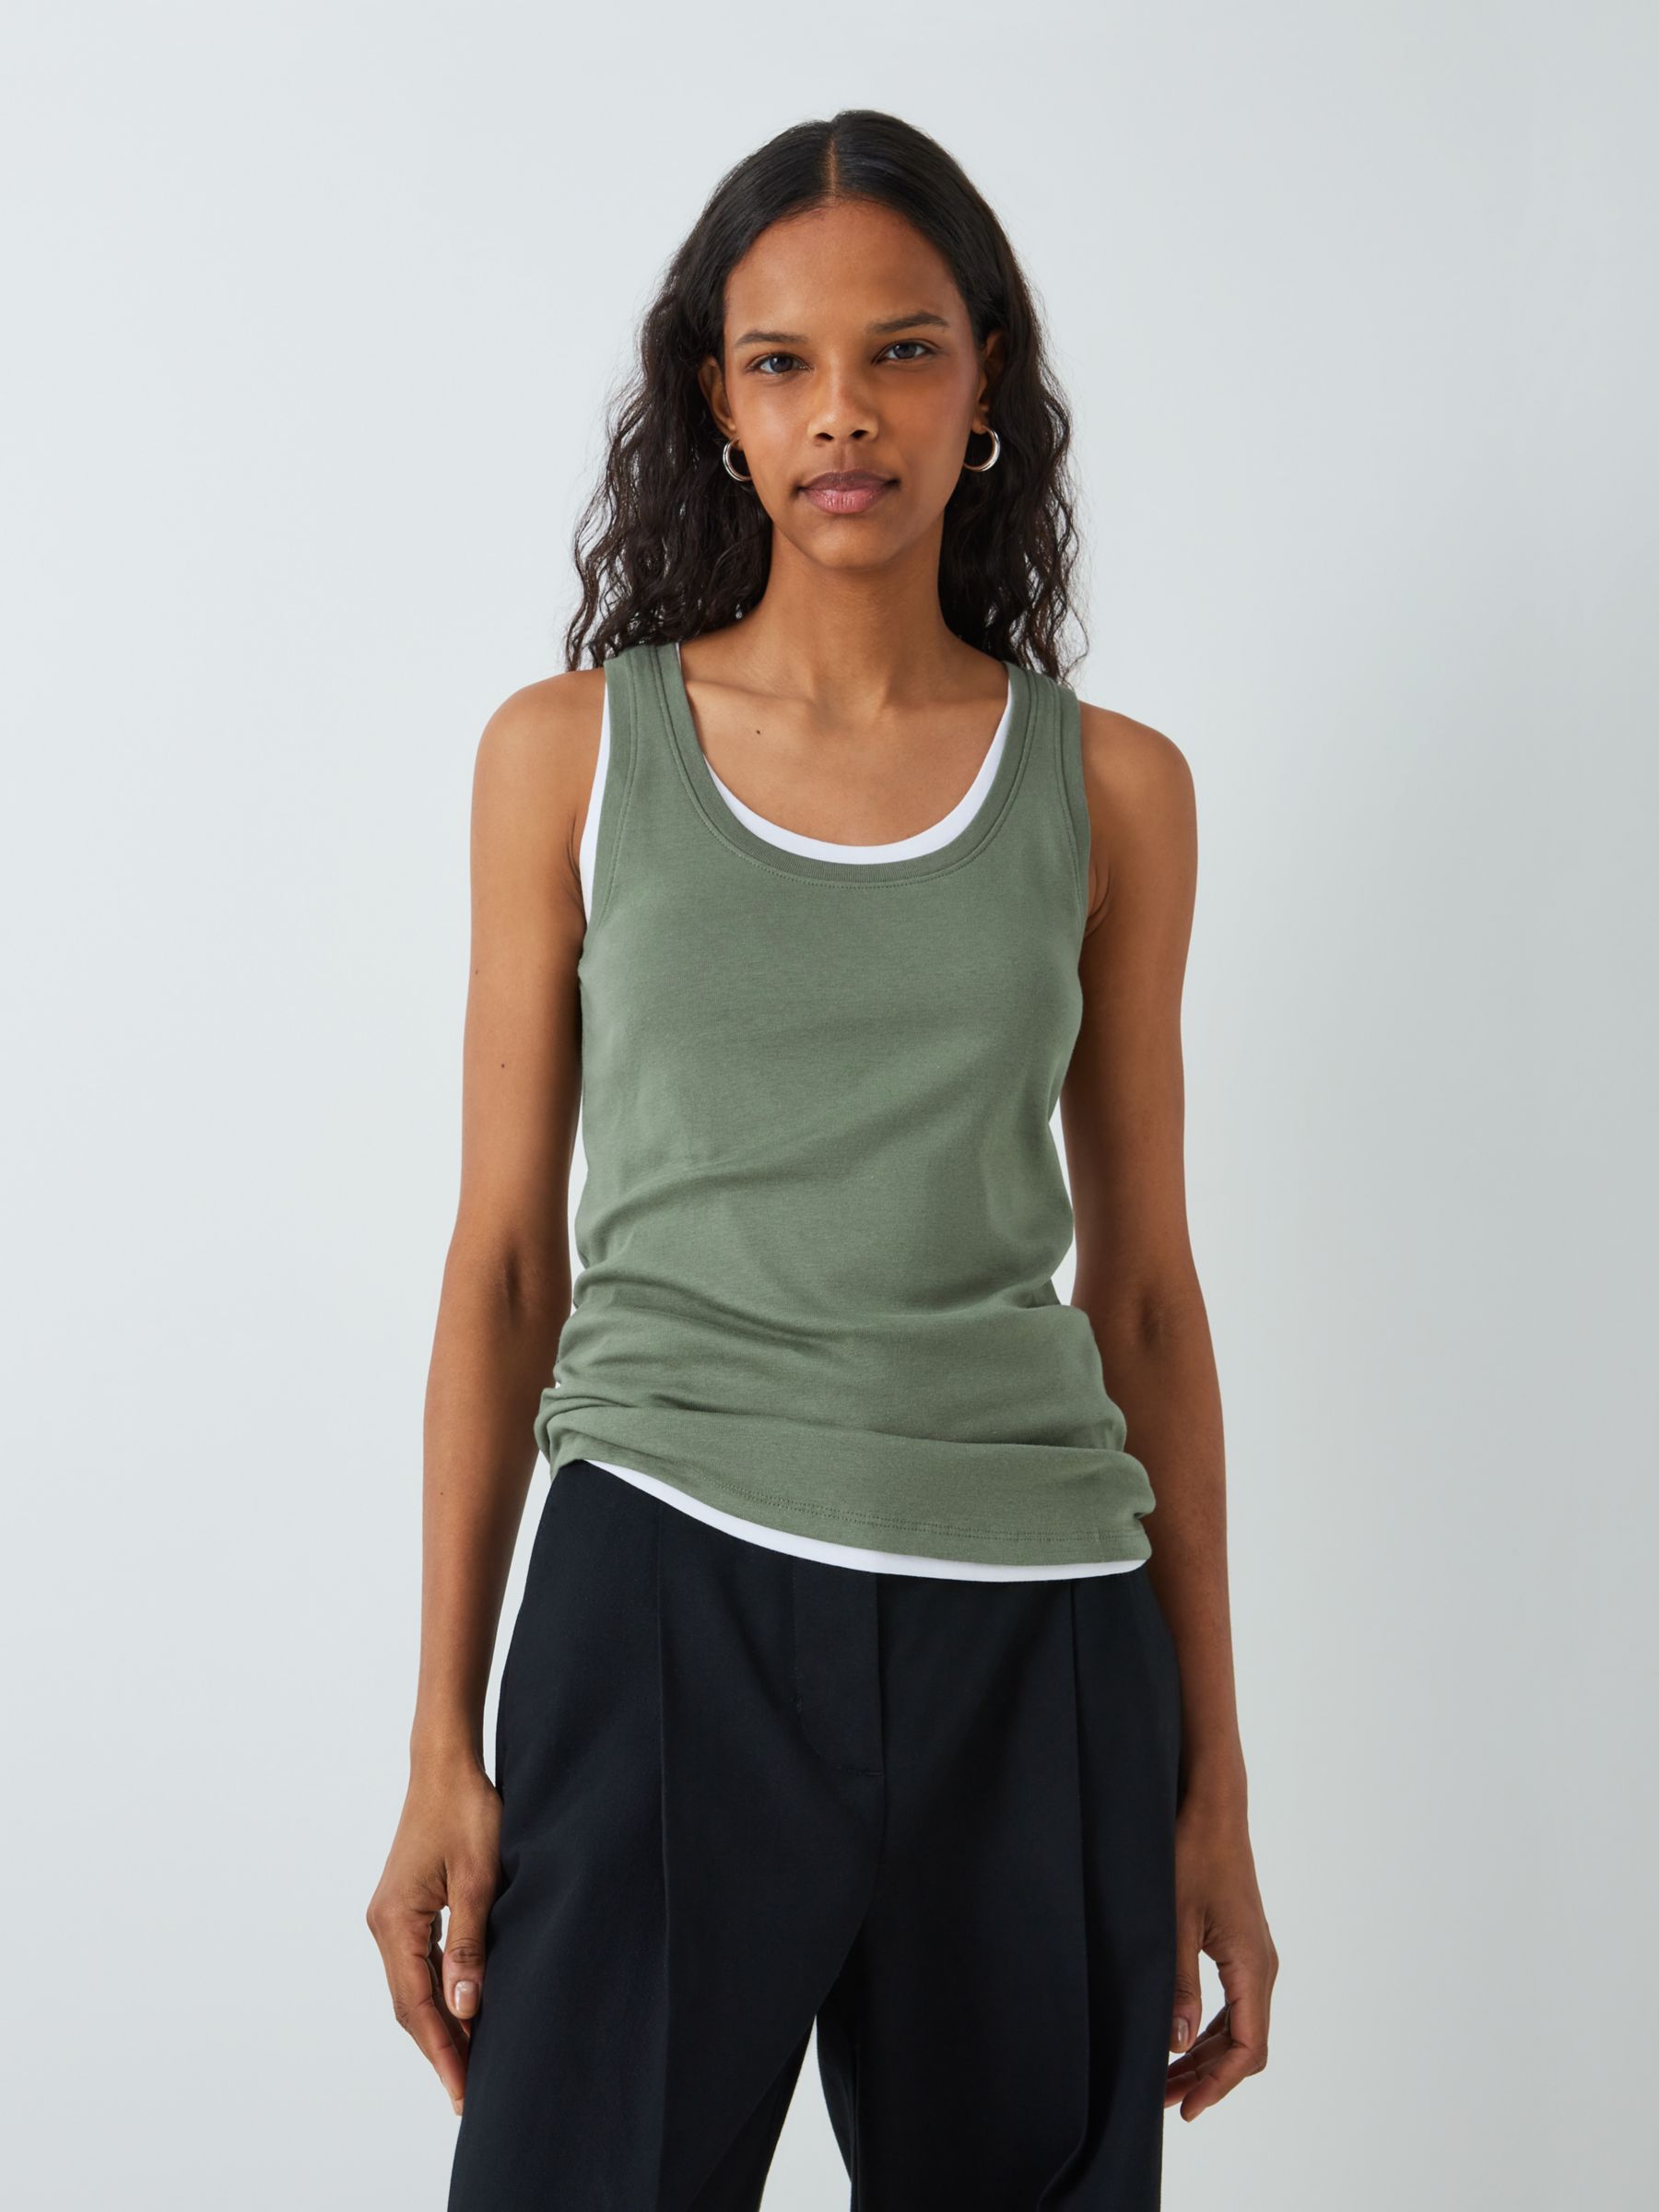 Green Sheer Tank Top, Sexy Camisole, Gift for Women, See Through